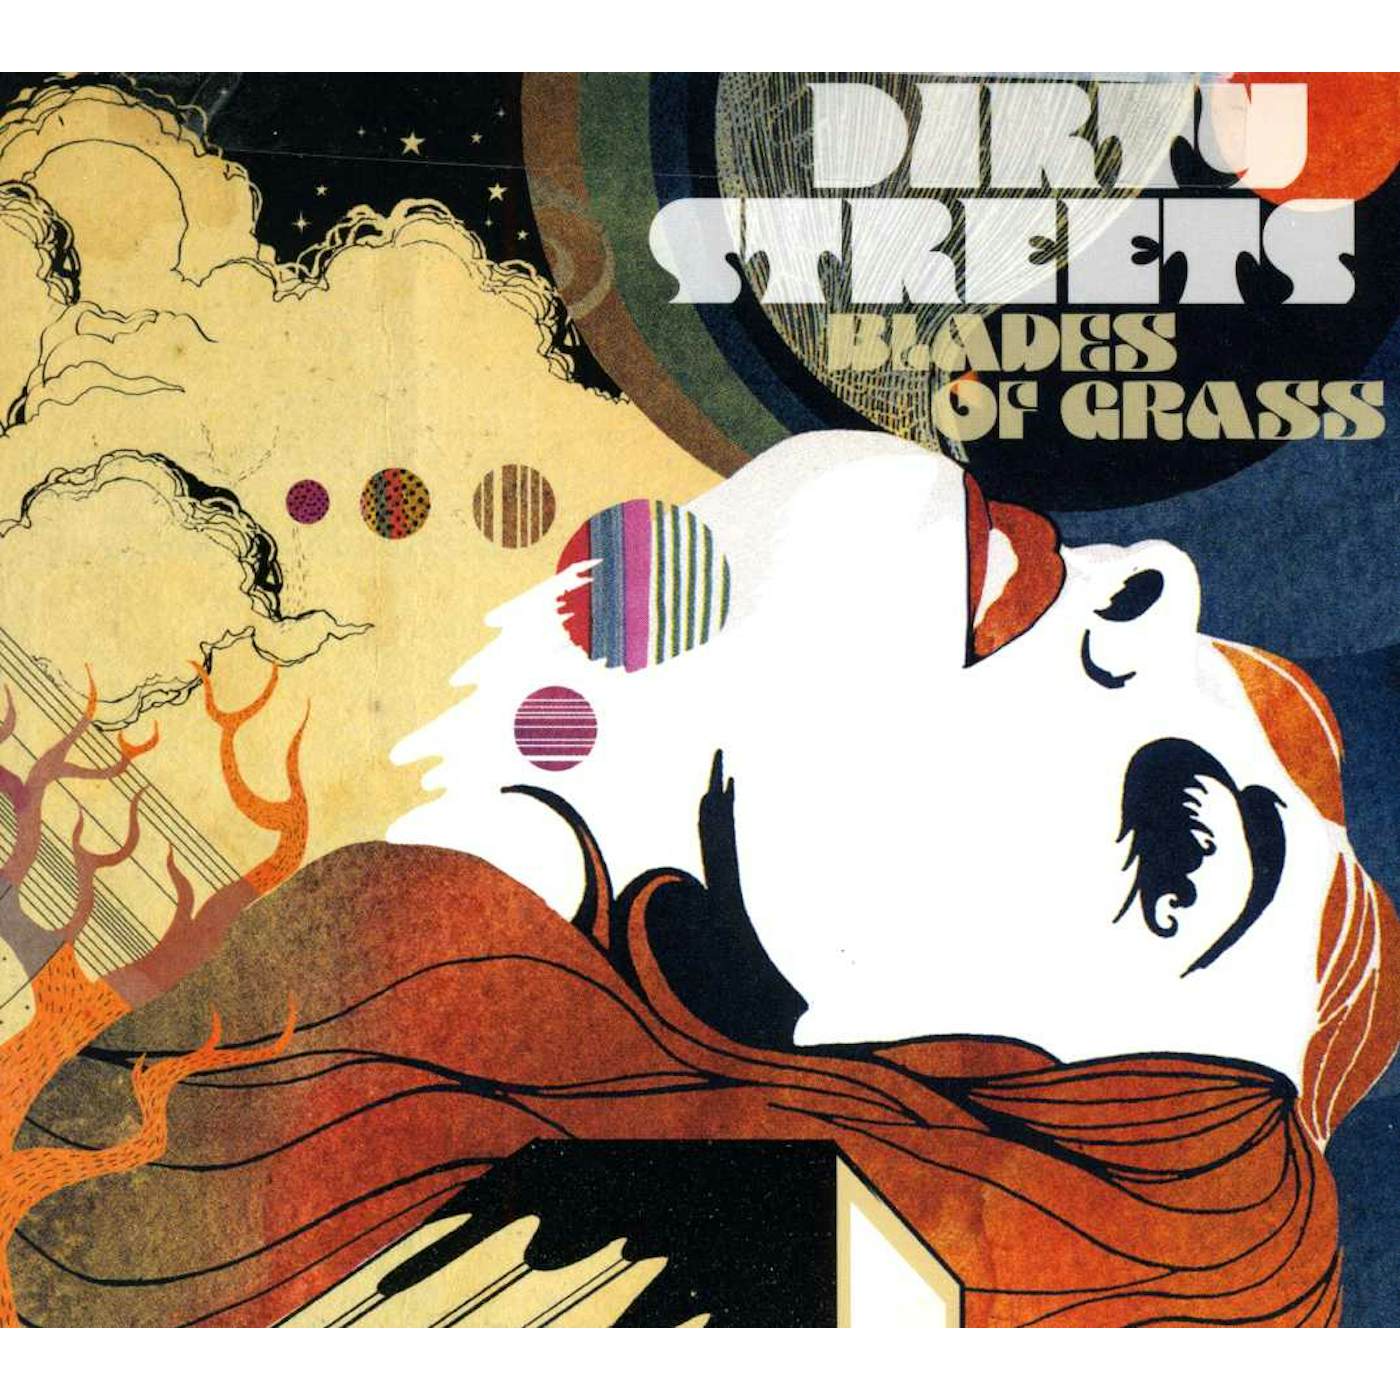 Dirty Streets BLADES OF GRASS CD